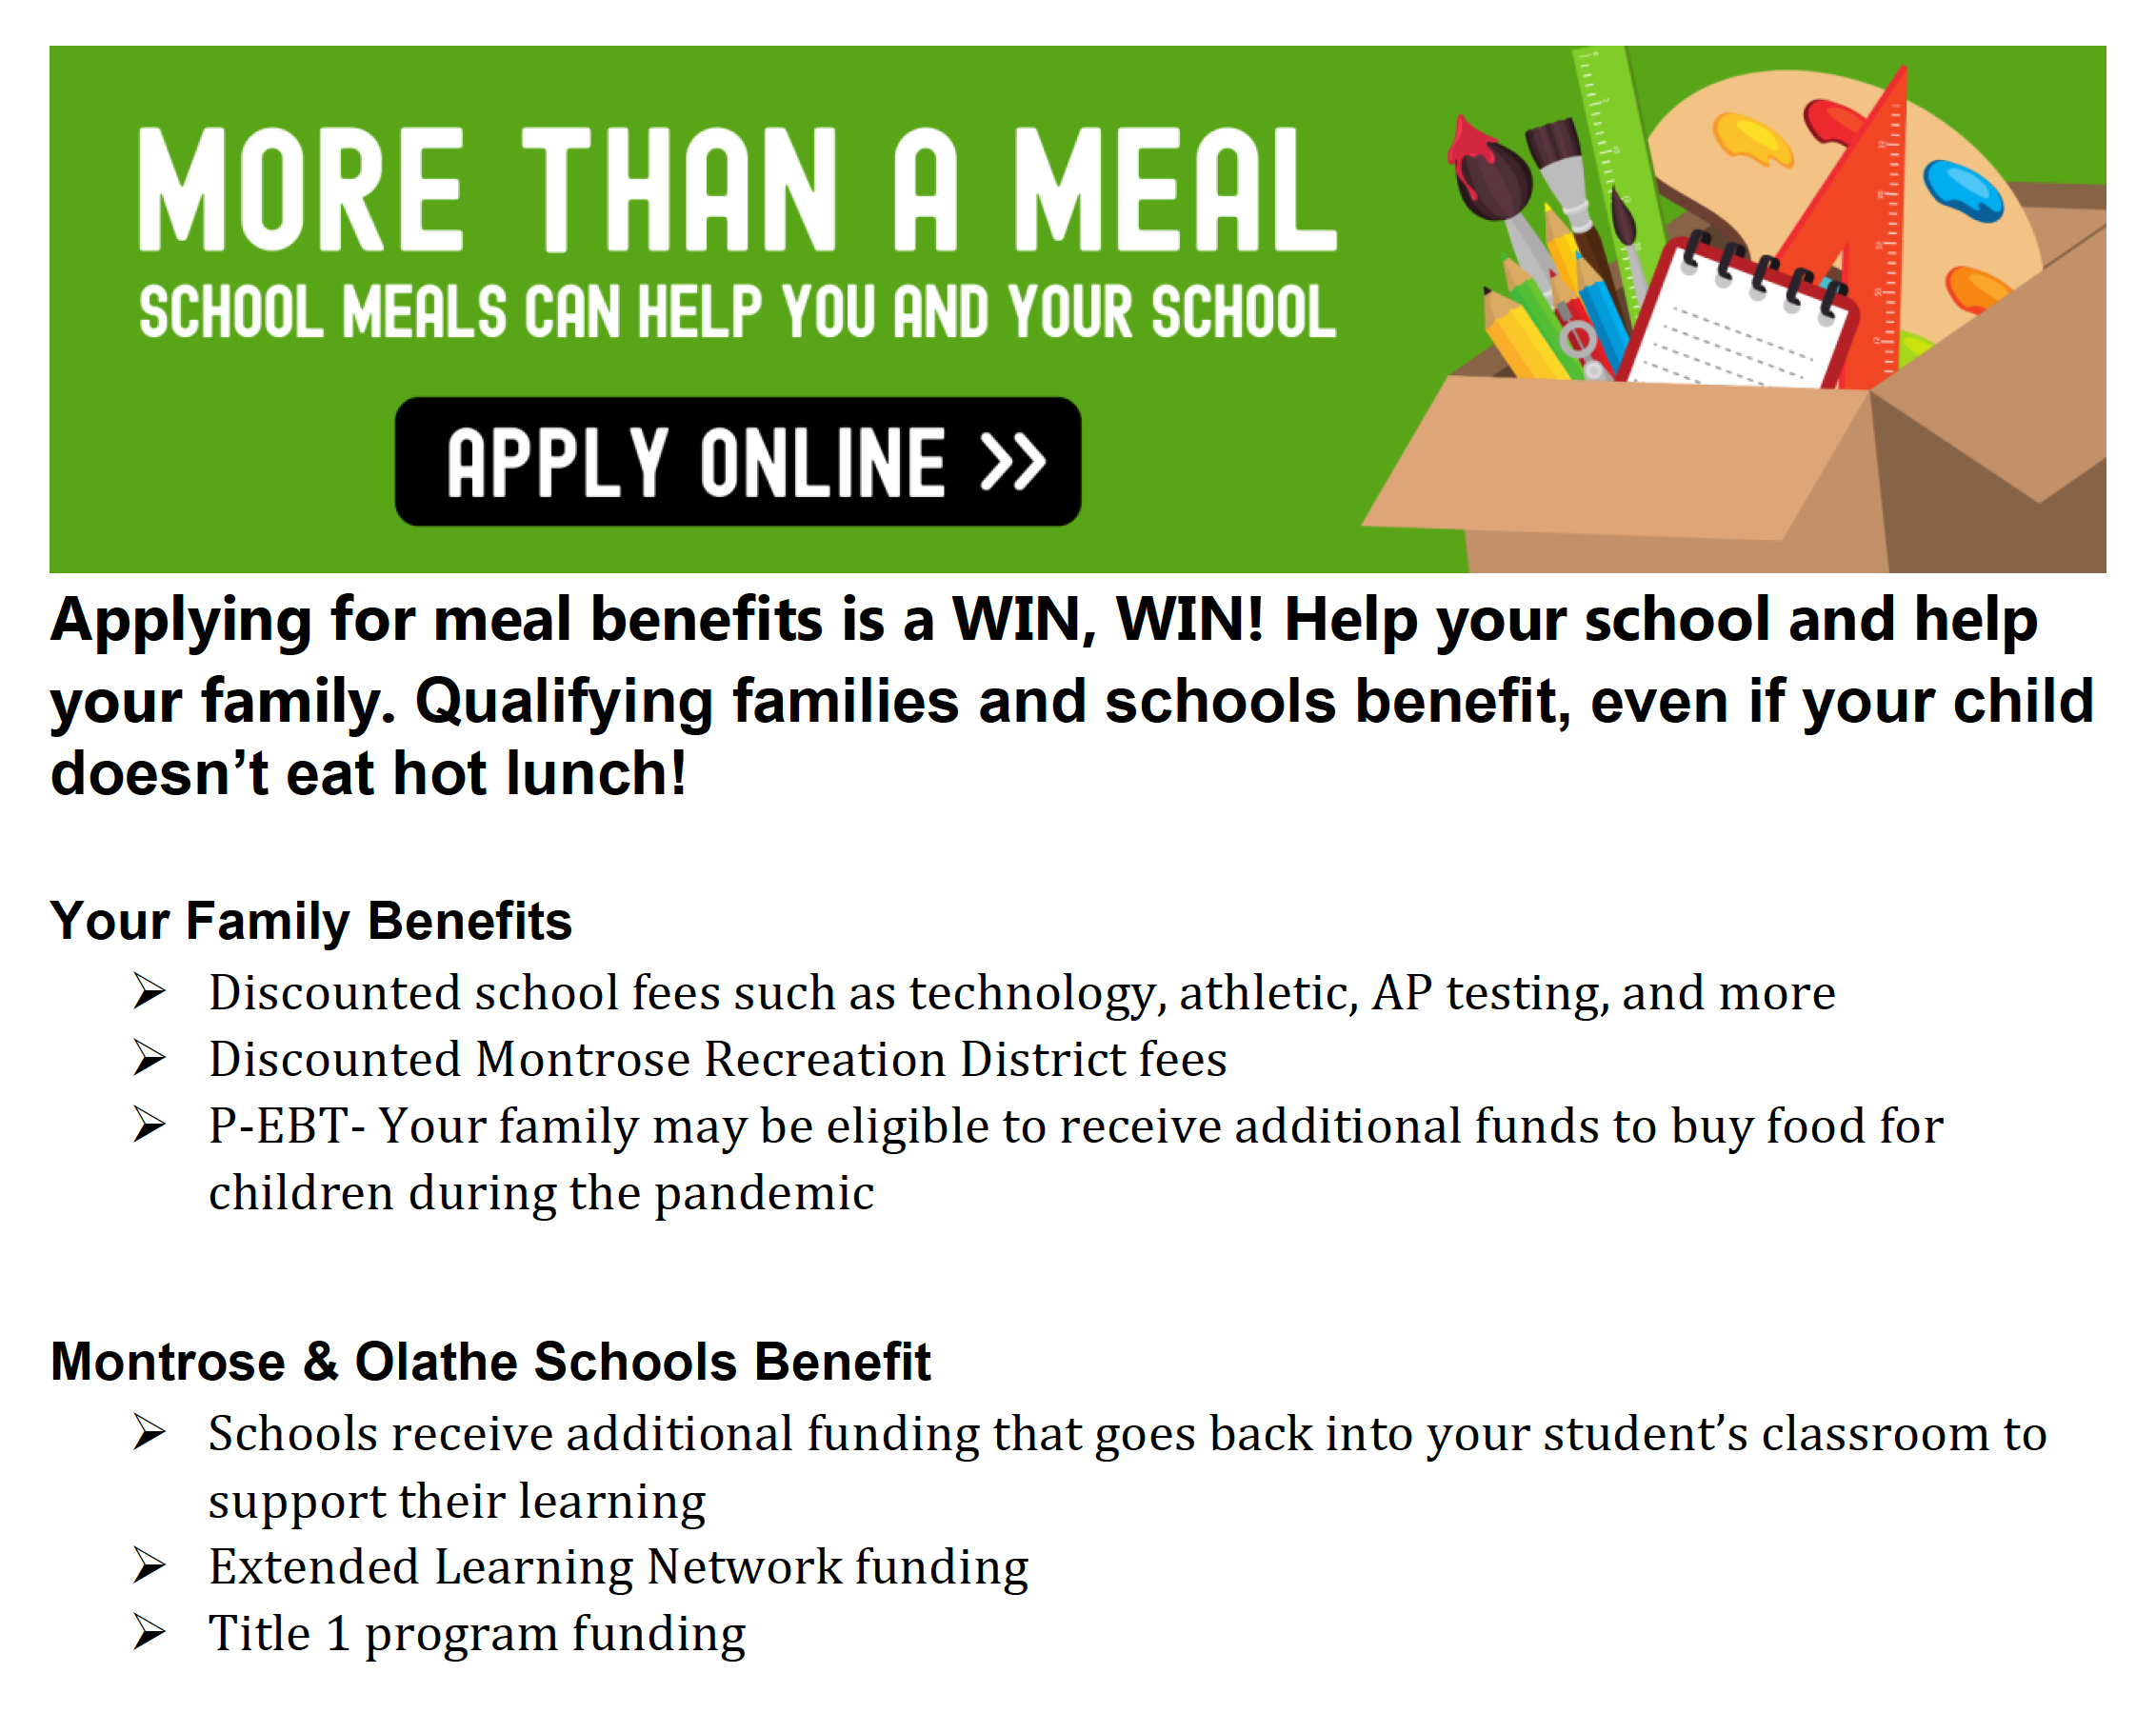 If your child gets free or reduced lunch, you qualify for EBT